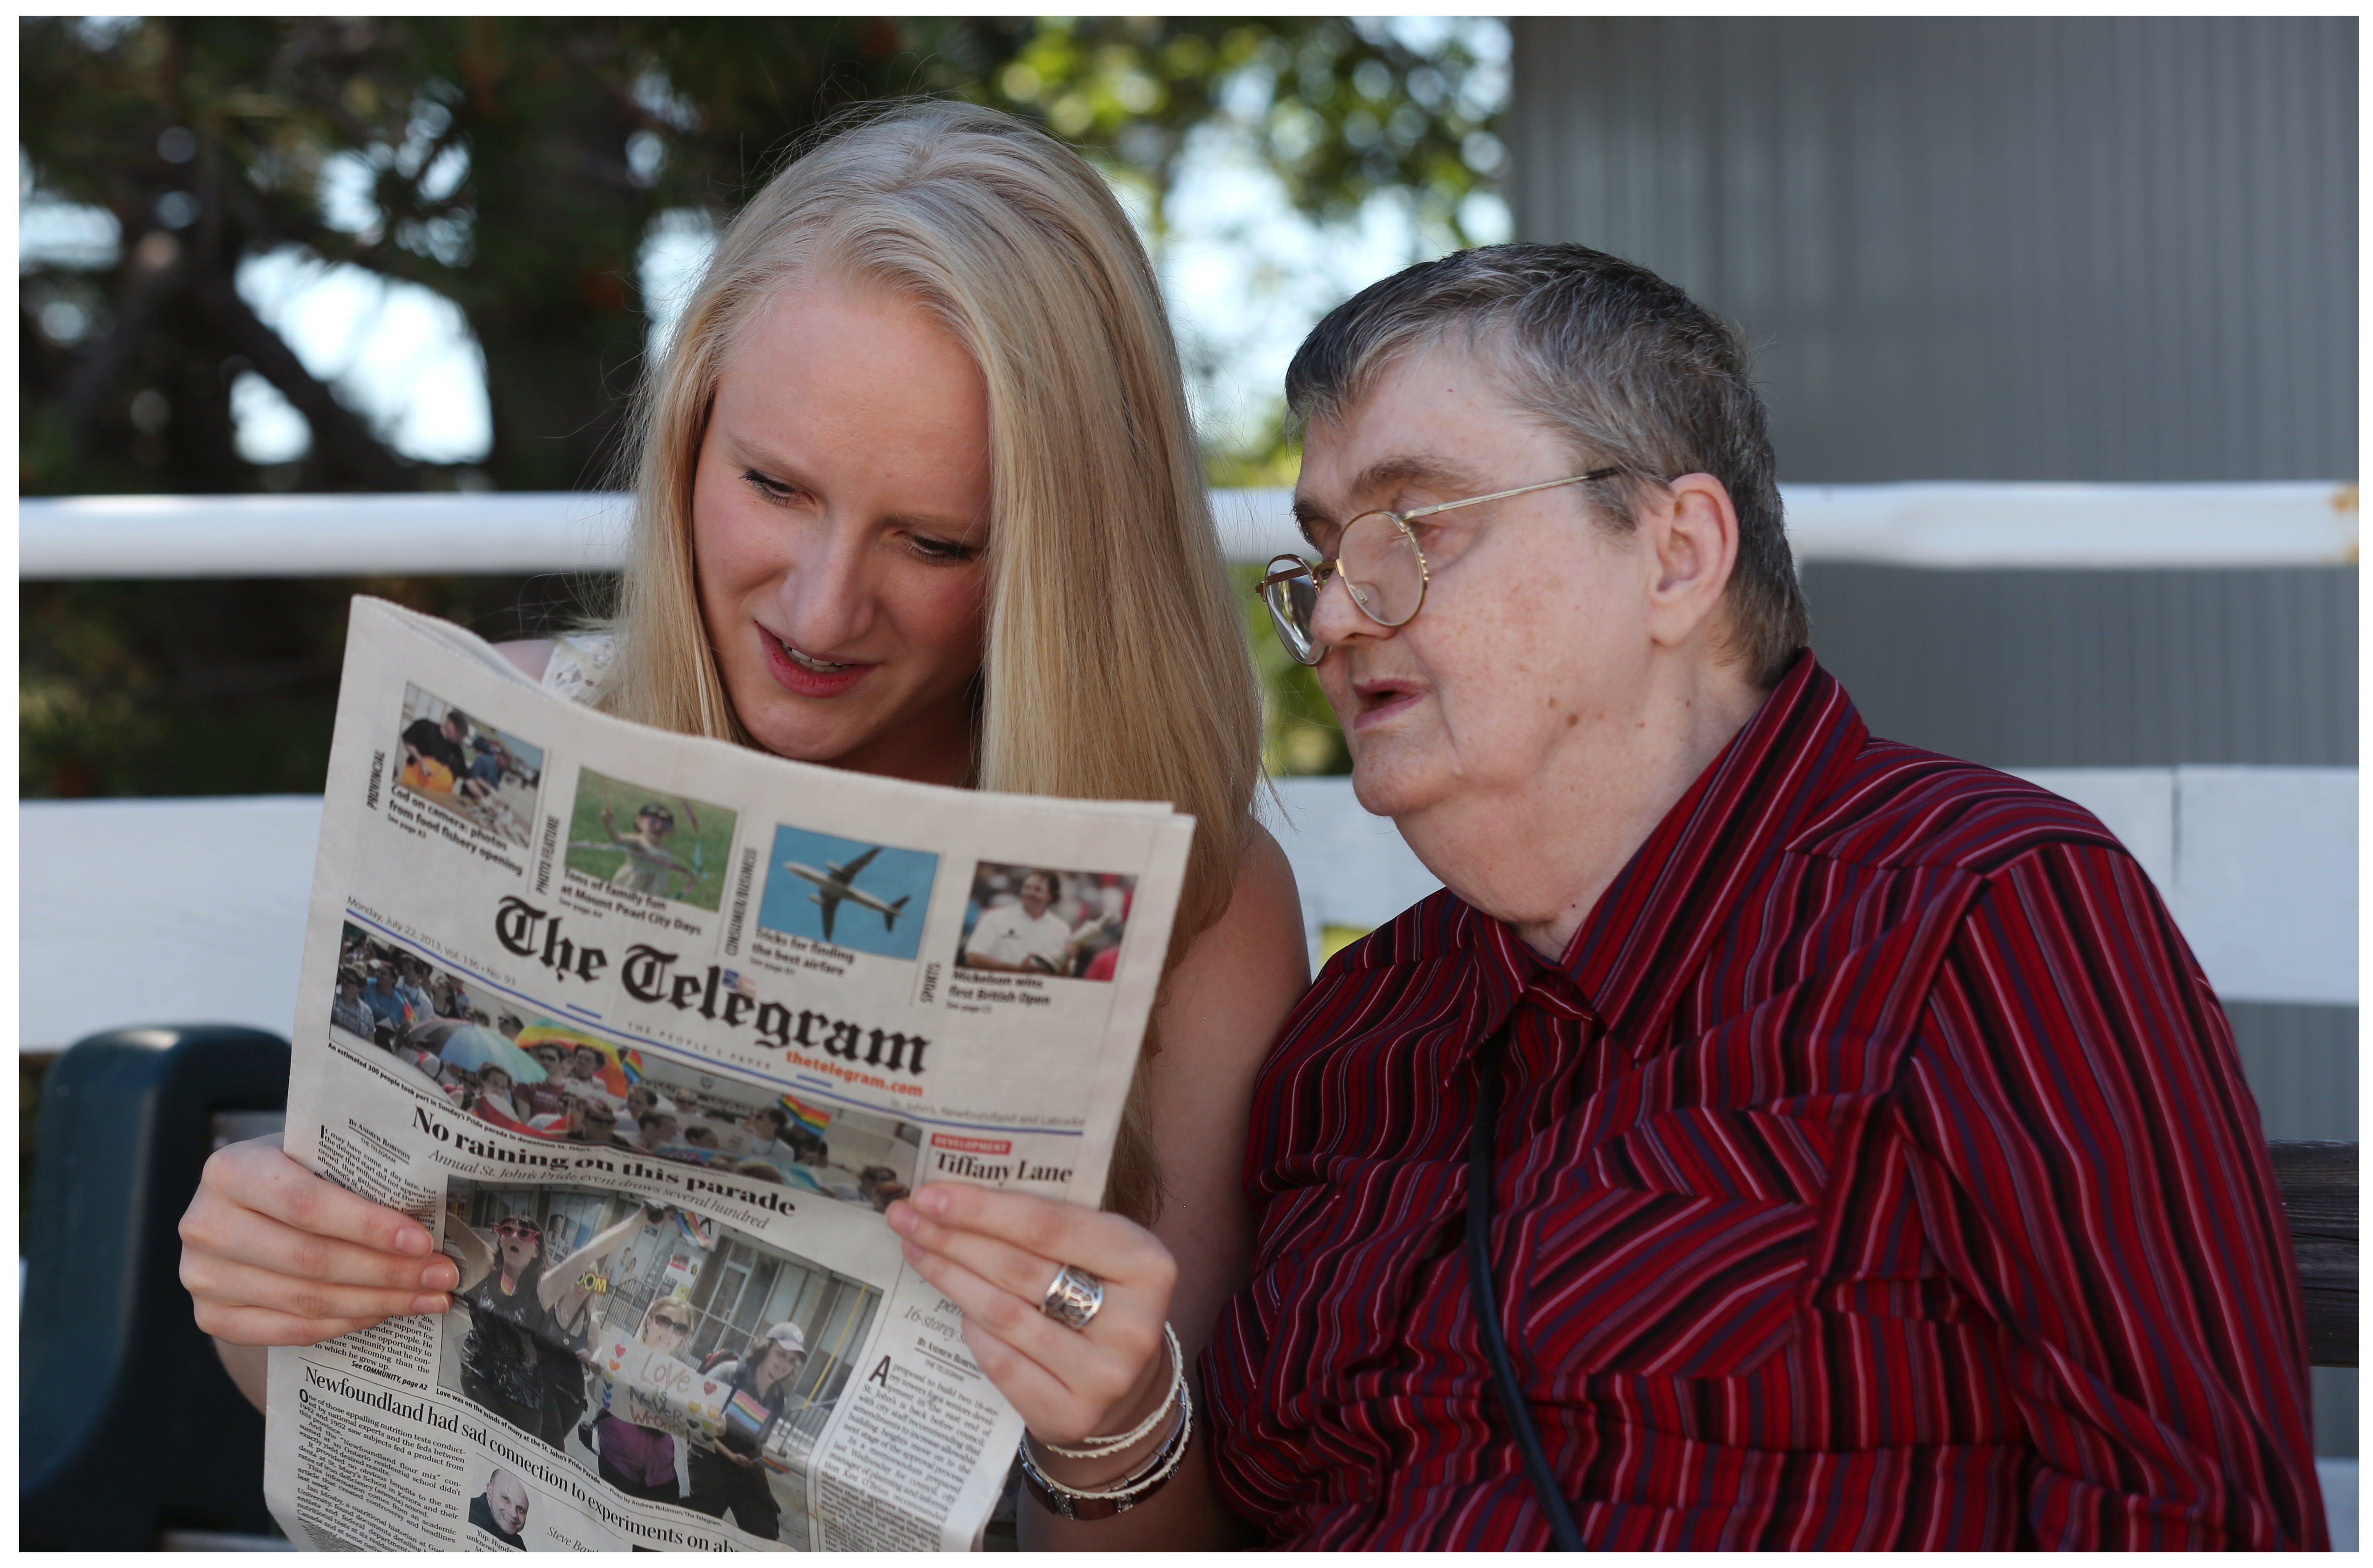 Two people read a newspaper together